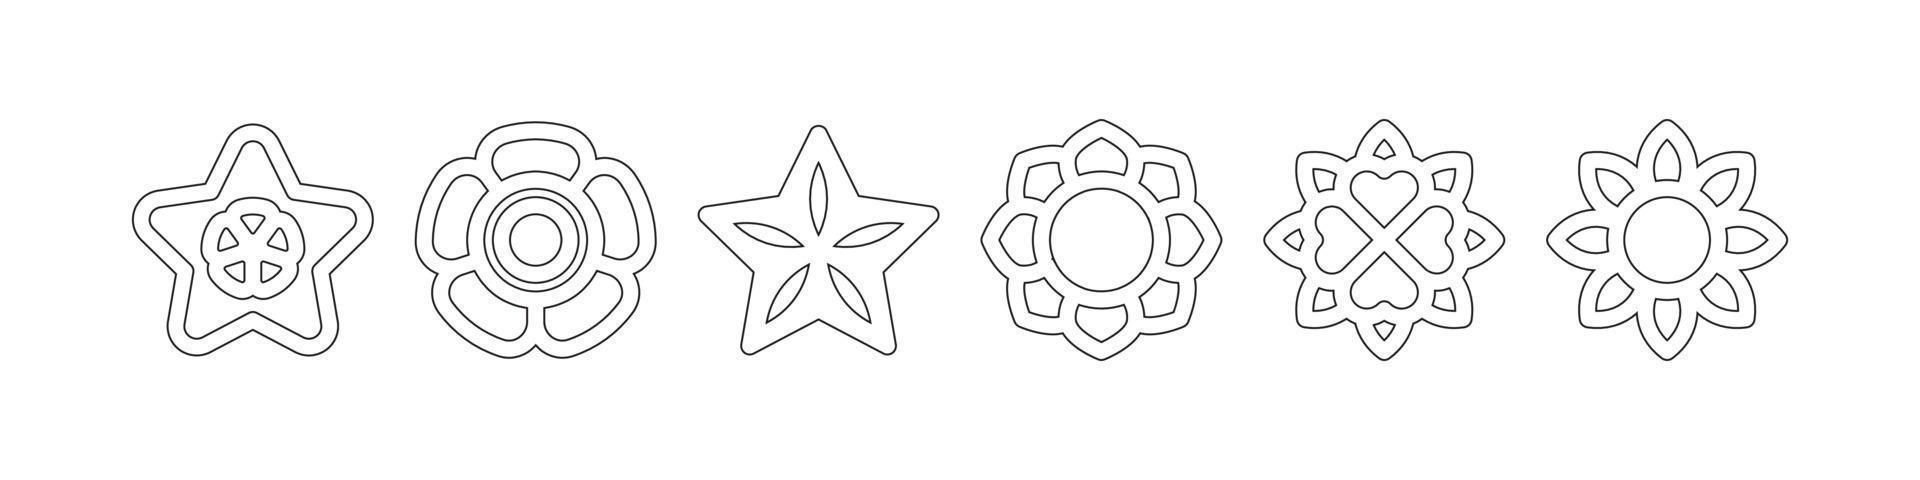 Flower icon geometry shape vector art isolated on white background free download